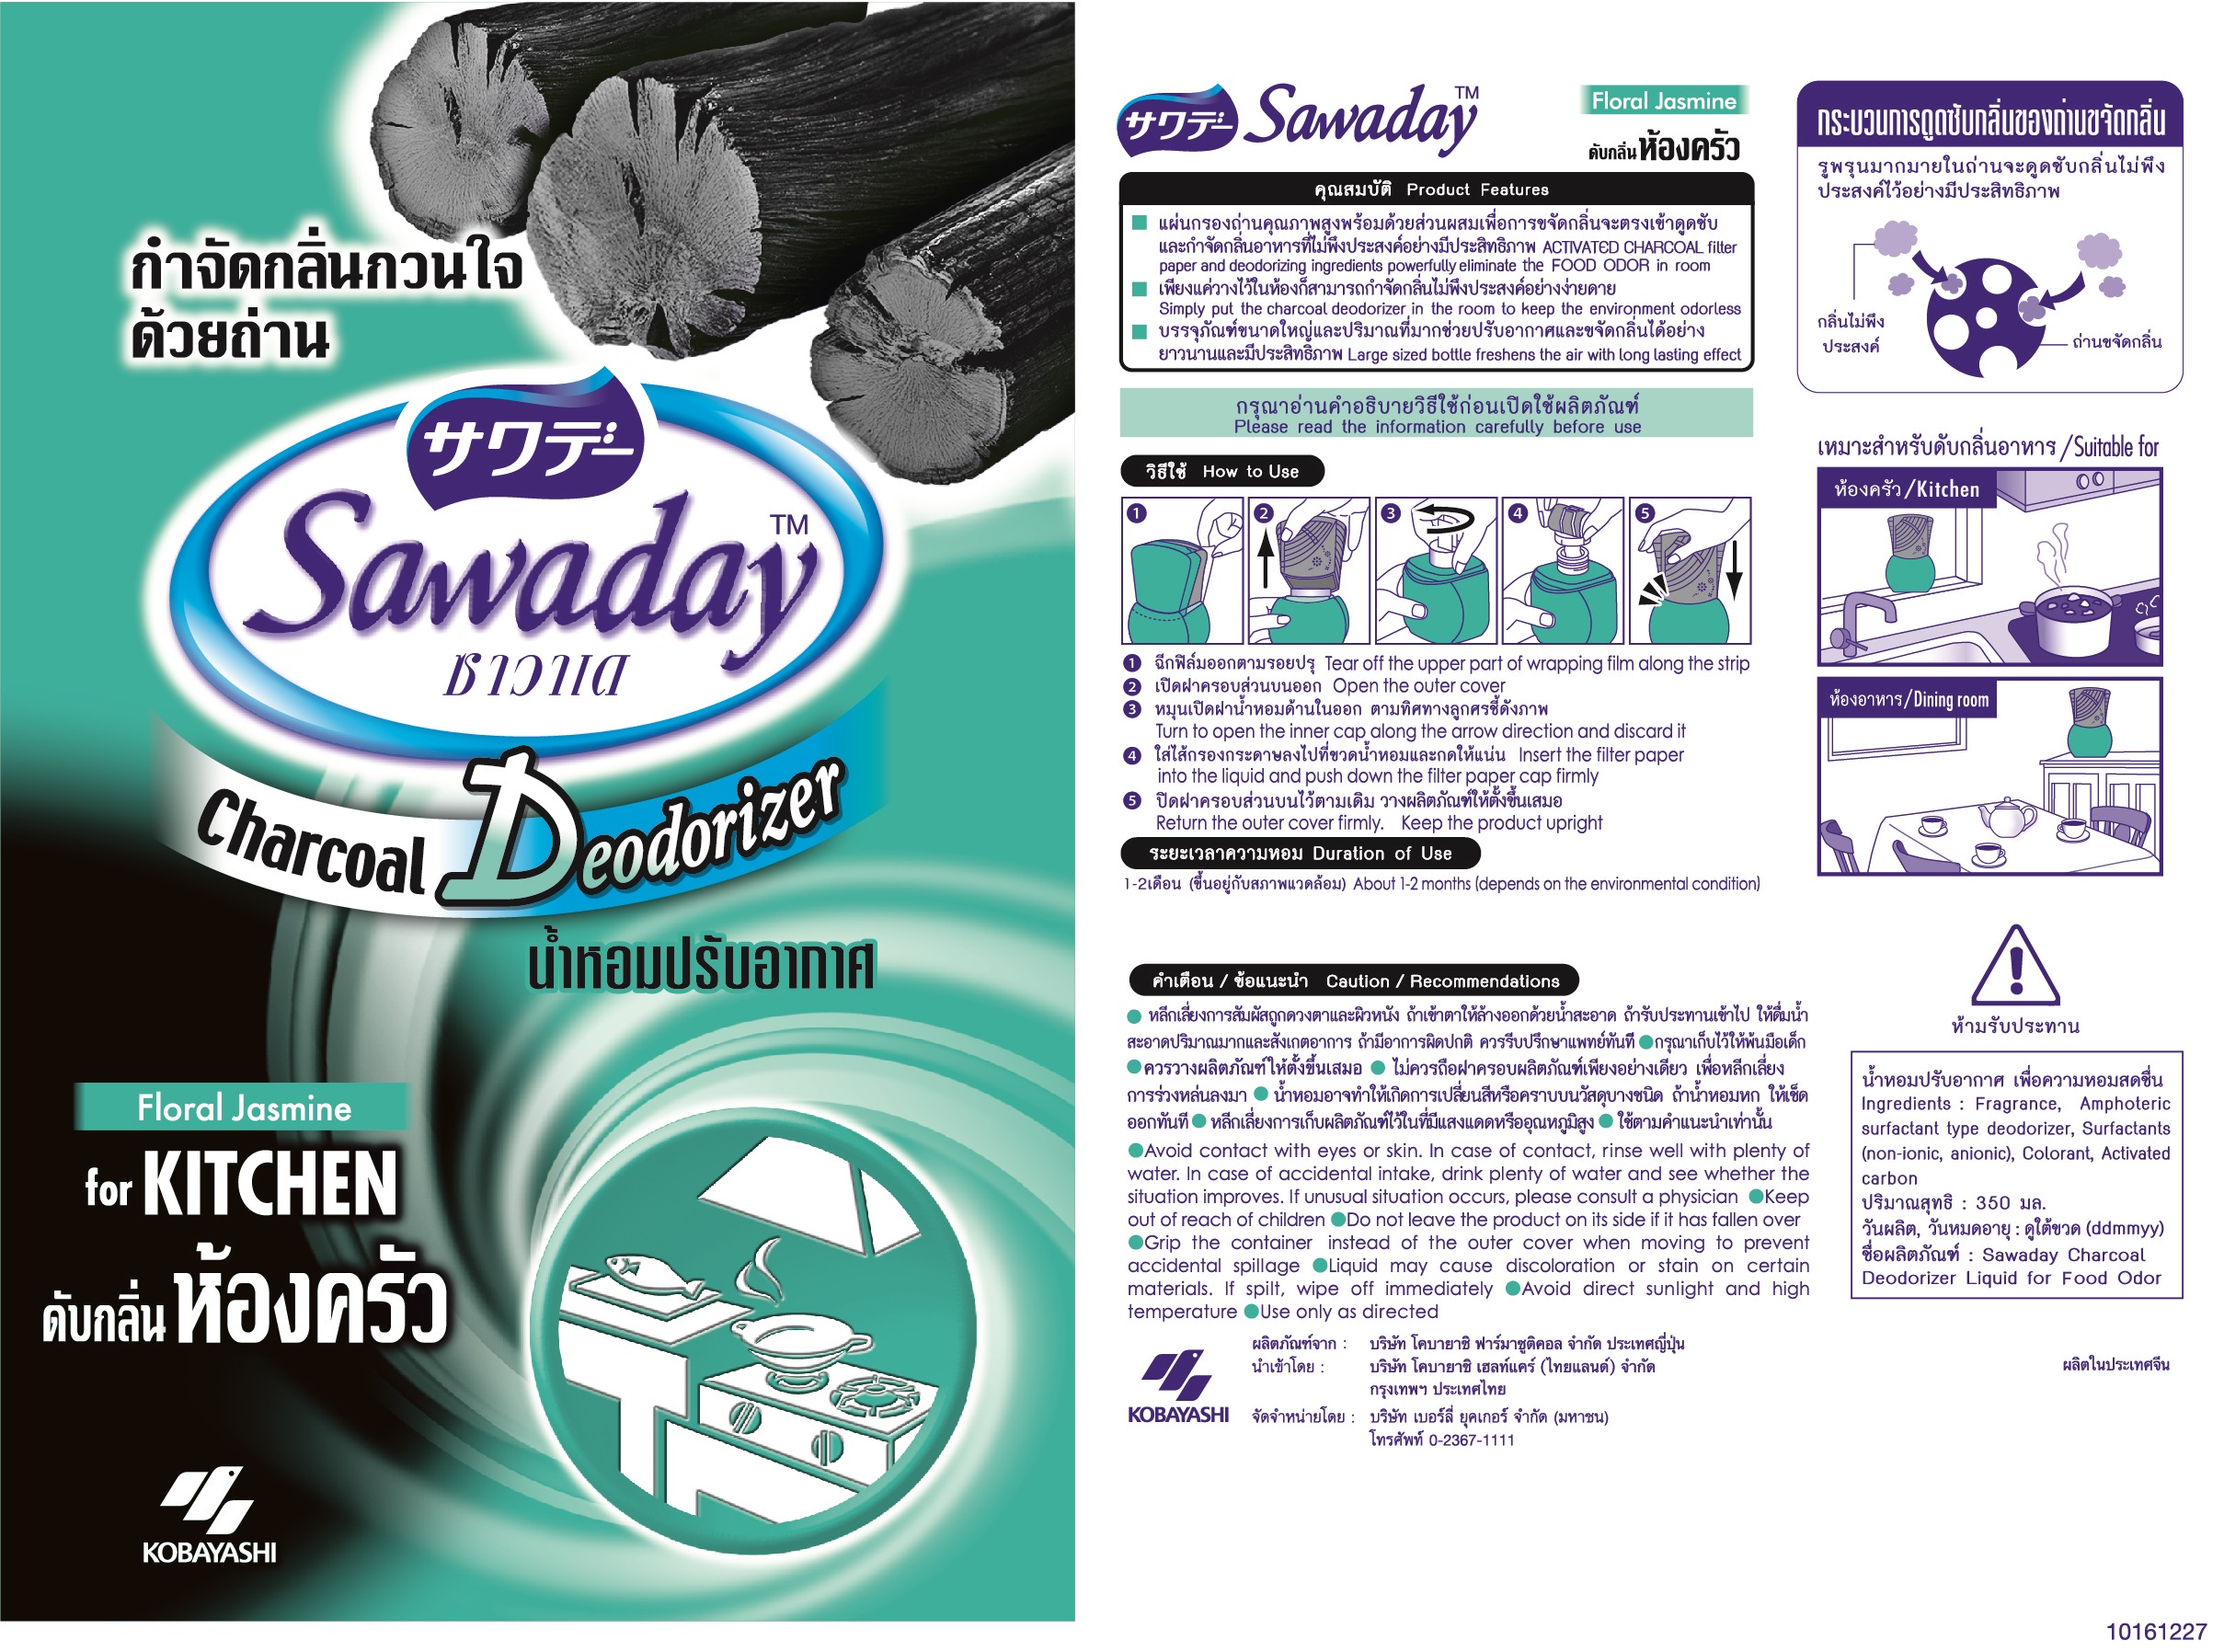 SAWADAY CHARCOAL DEODORIZER FOR KITCHEN